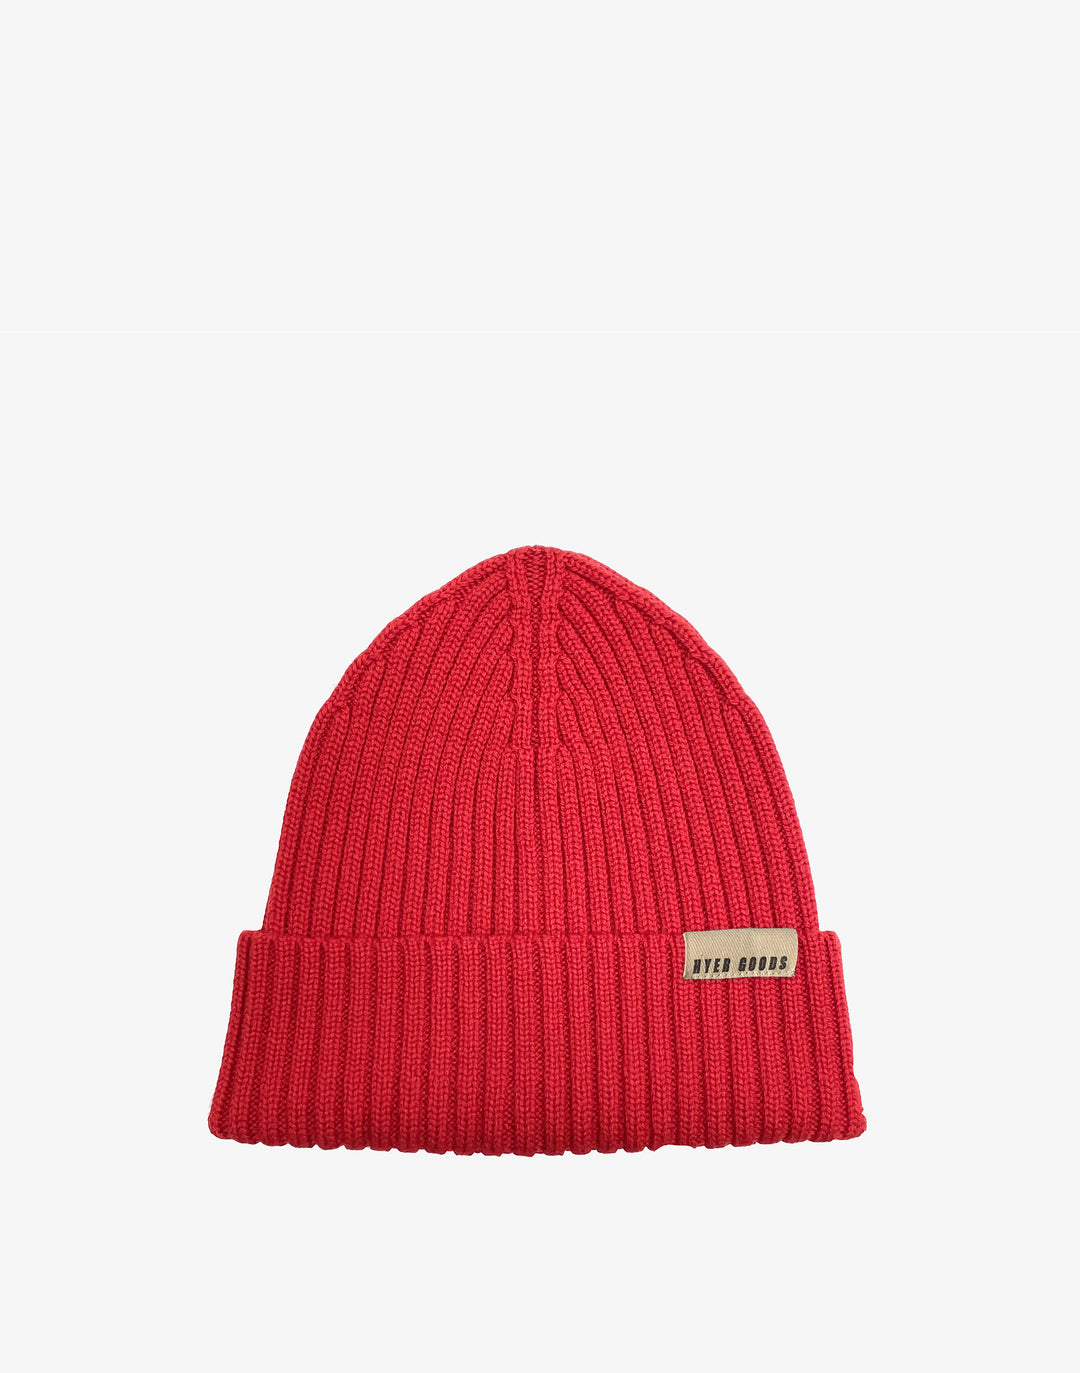 Hyer Goods_A Better Beanie_Cherry Red_#color_cherry-red